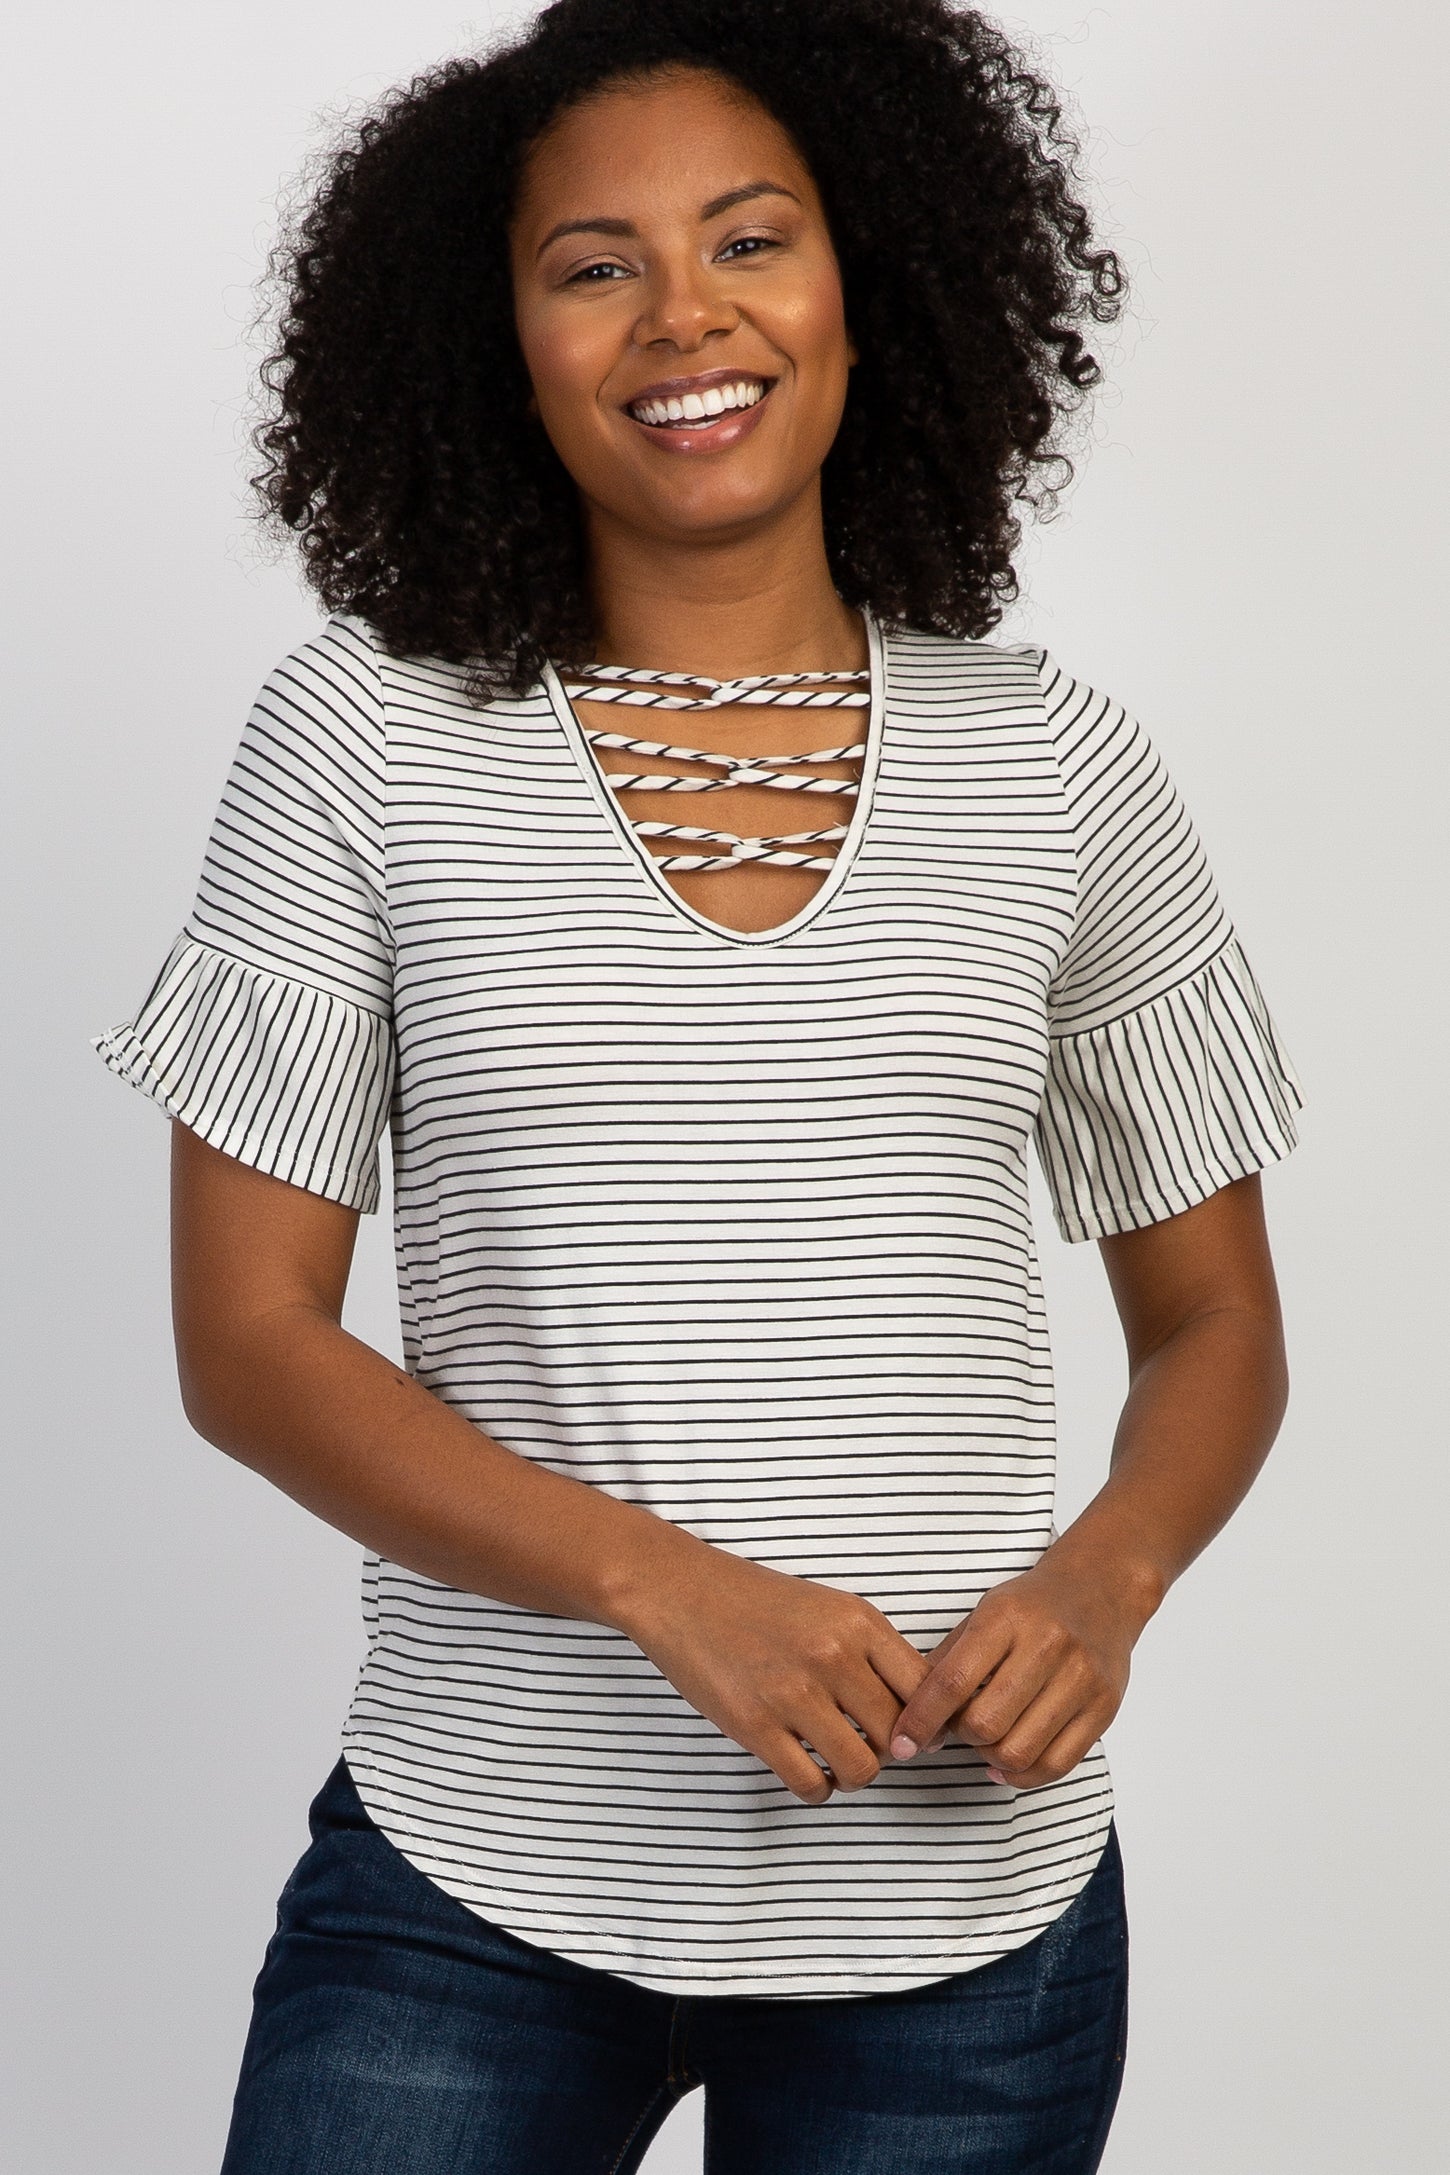 Ivory Striped Caged Crisscross Maternity Top